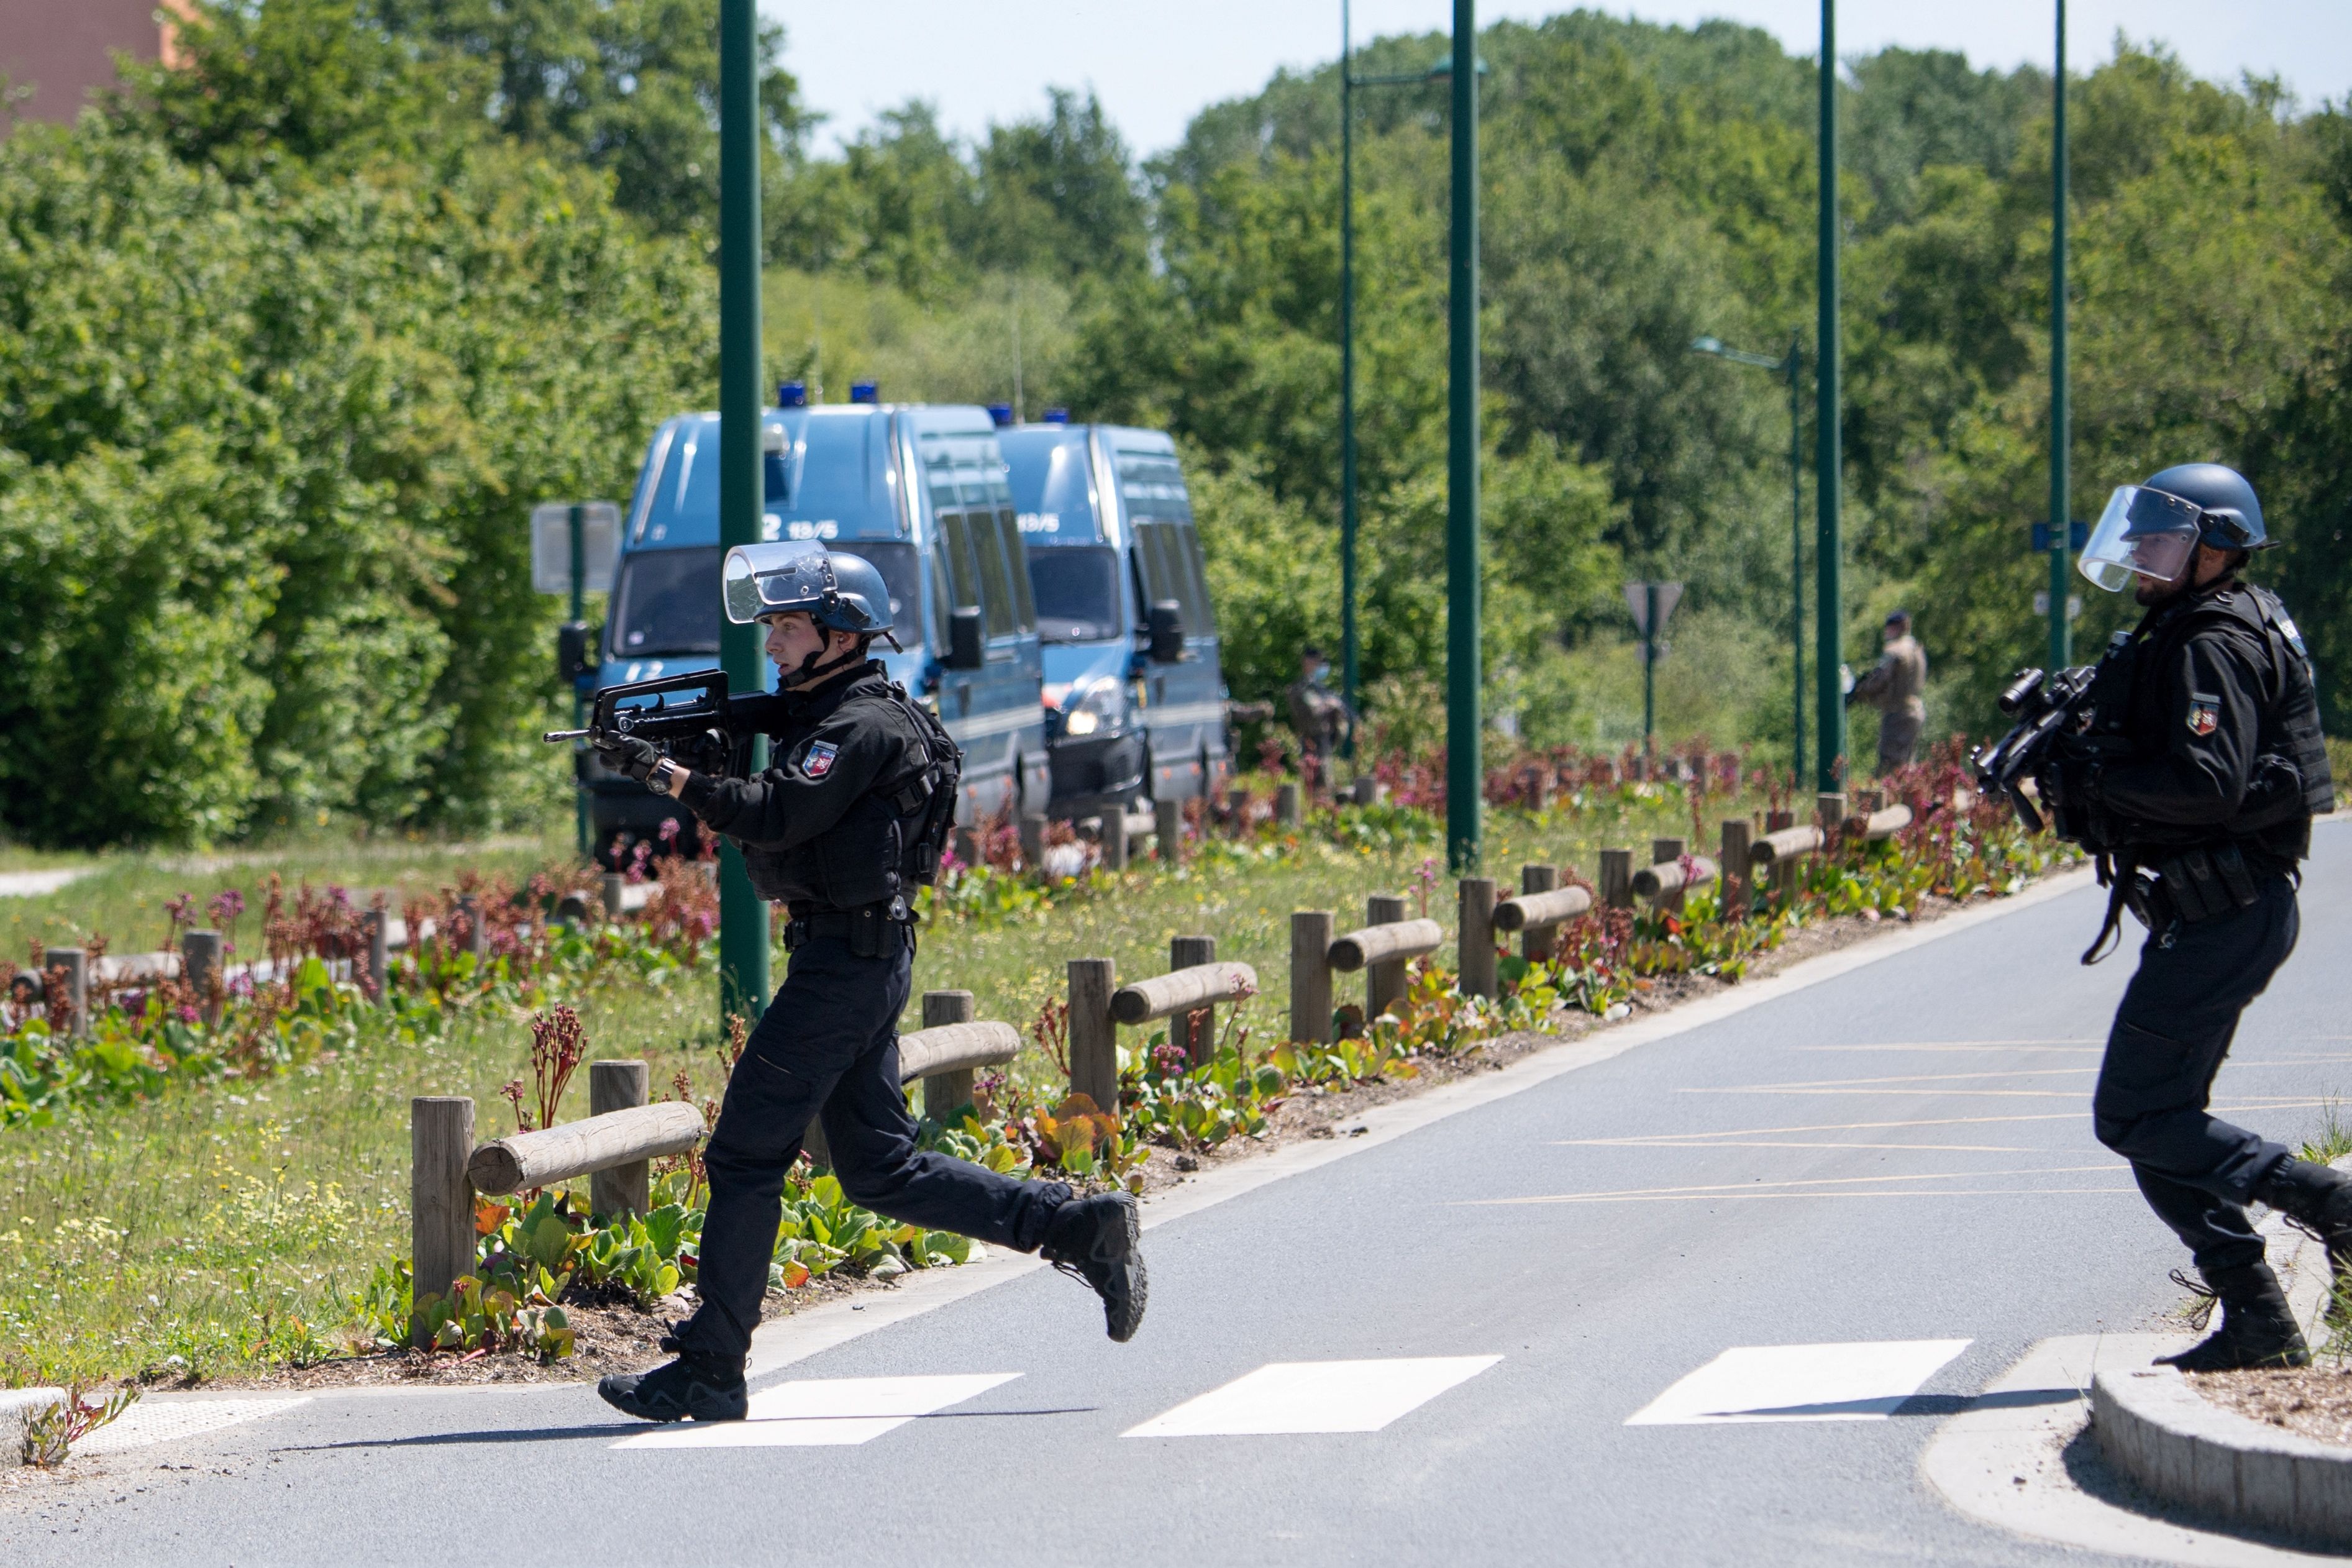 Members of the National Gendarmerie Intervention Group (GIGN) inspect the site where a suspect has been seen after a municipal policewoman was attacked with a knife on 28 May, 2021. A major search is underway in France’s Dordogne region for a man accused of shooting at law enforcement.